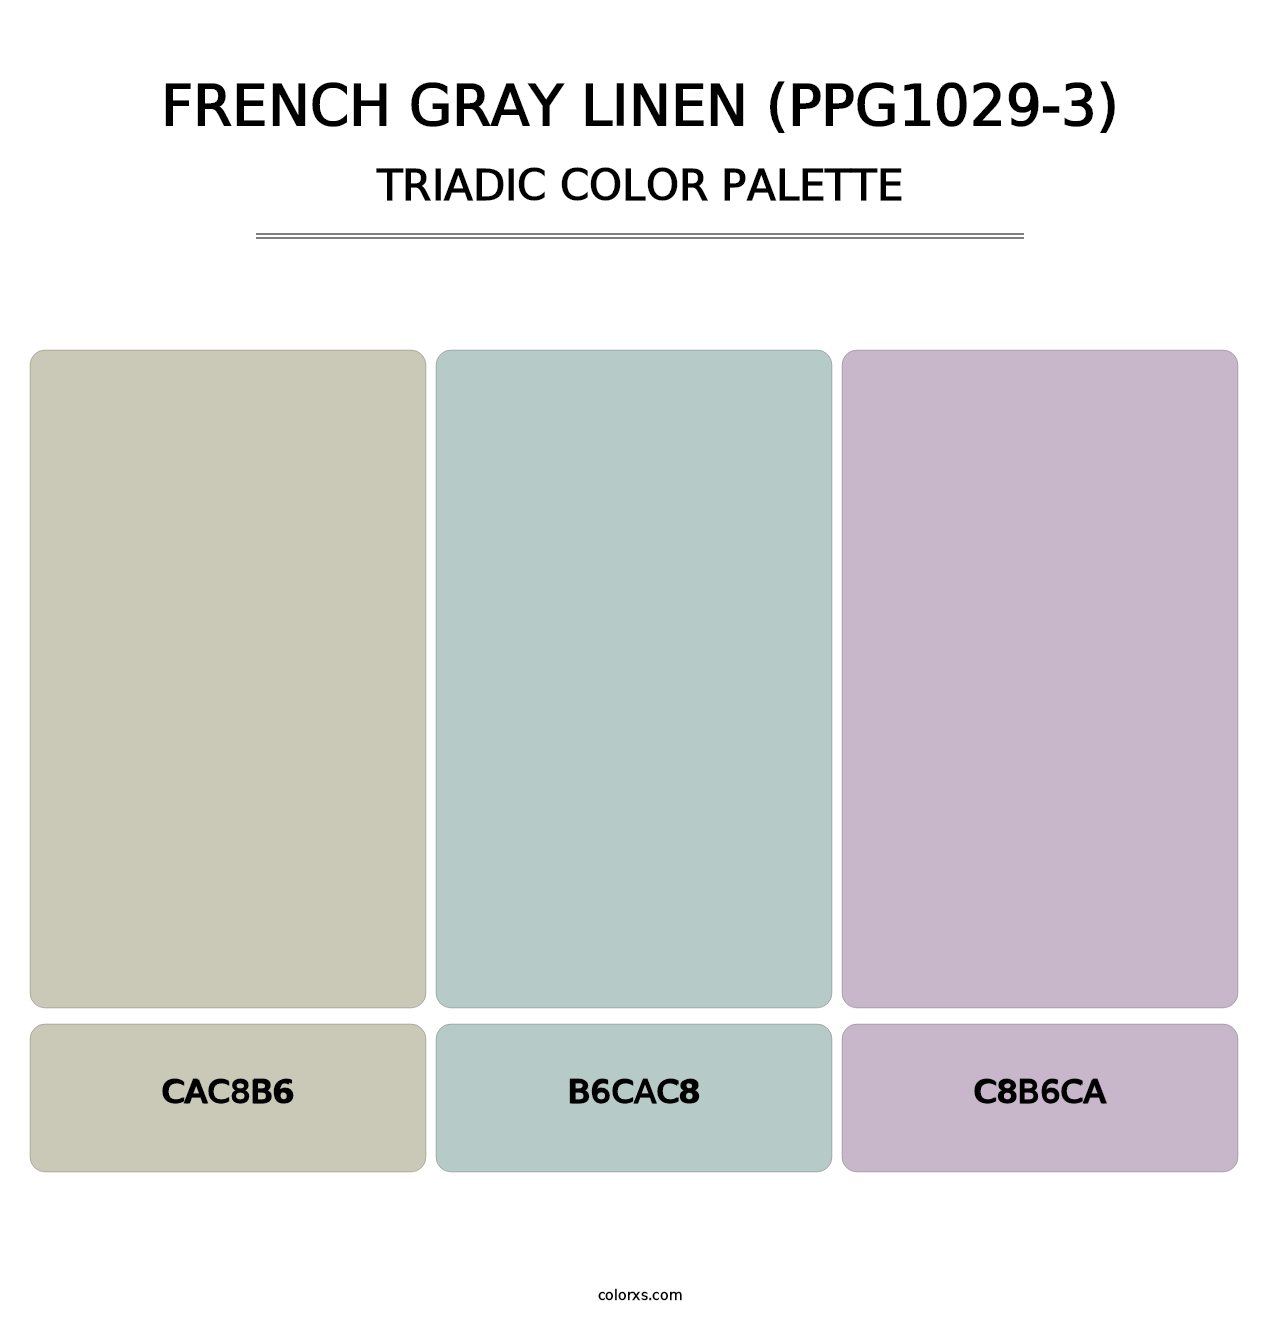 French Gray Linen (PPG1029-3) - Triadic Color Palette